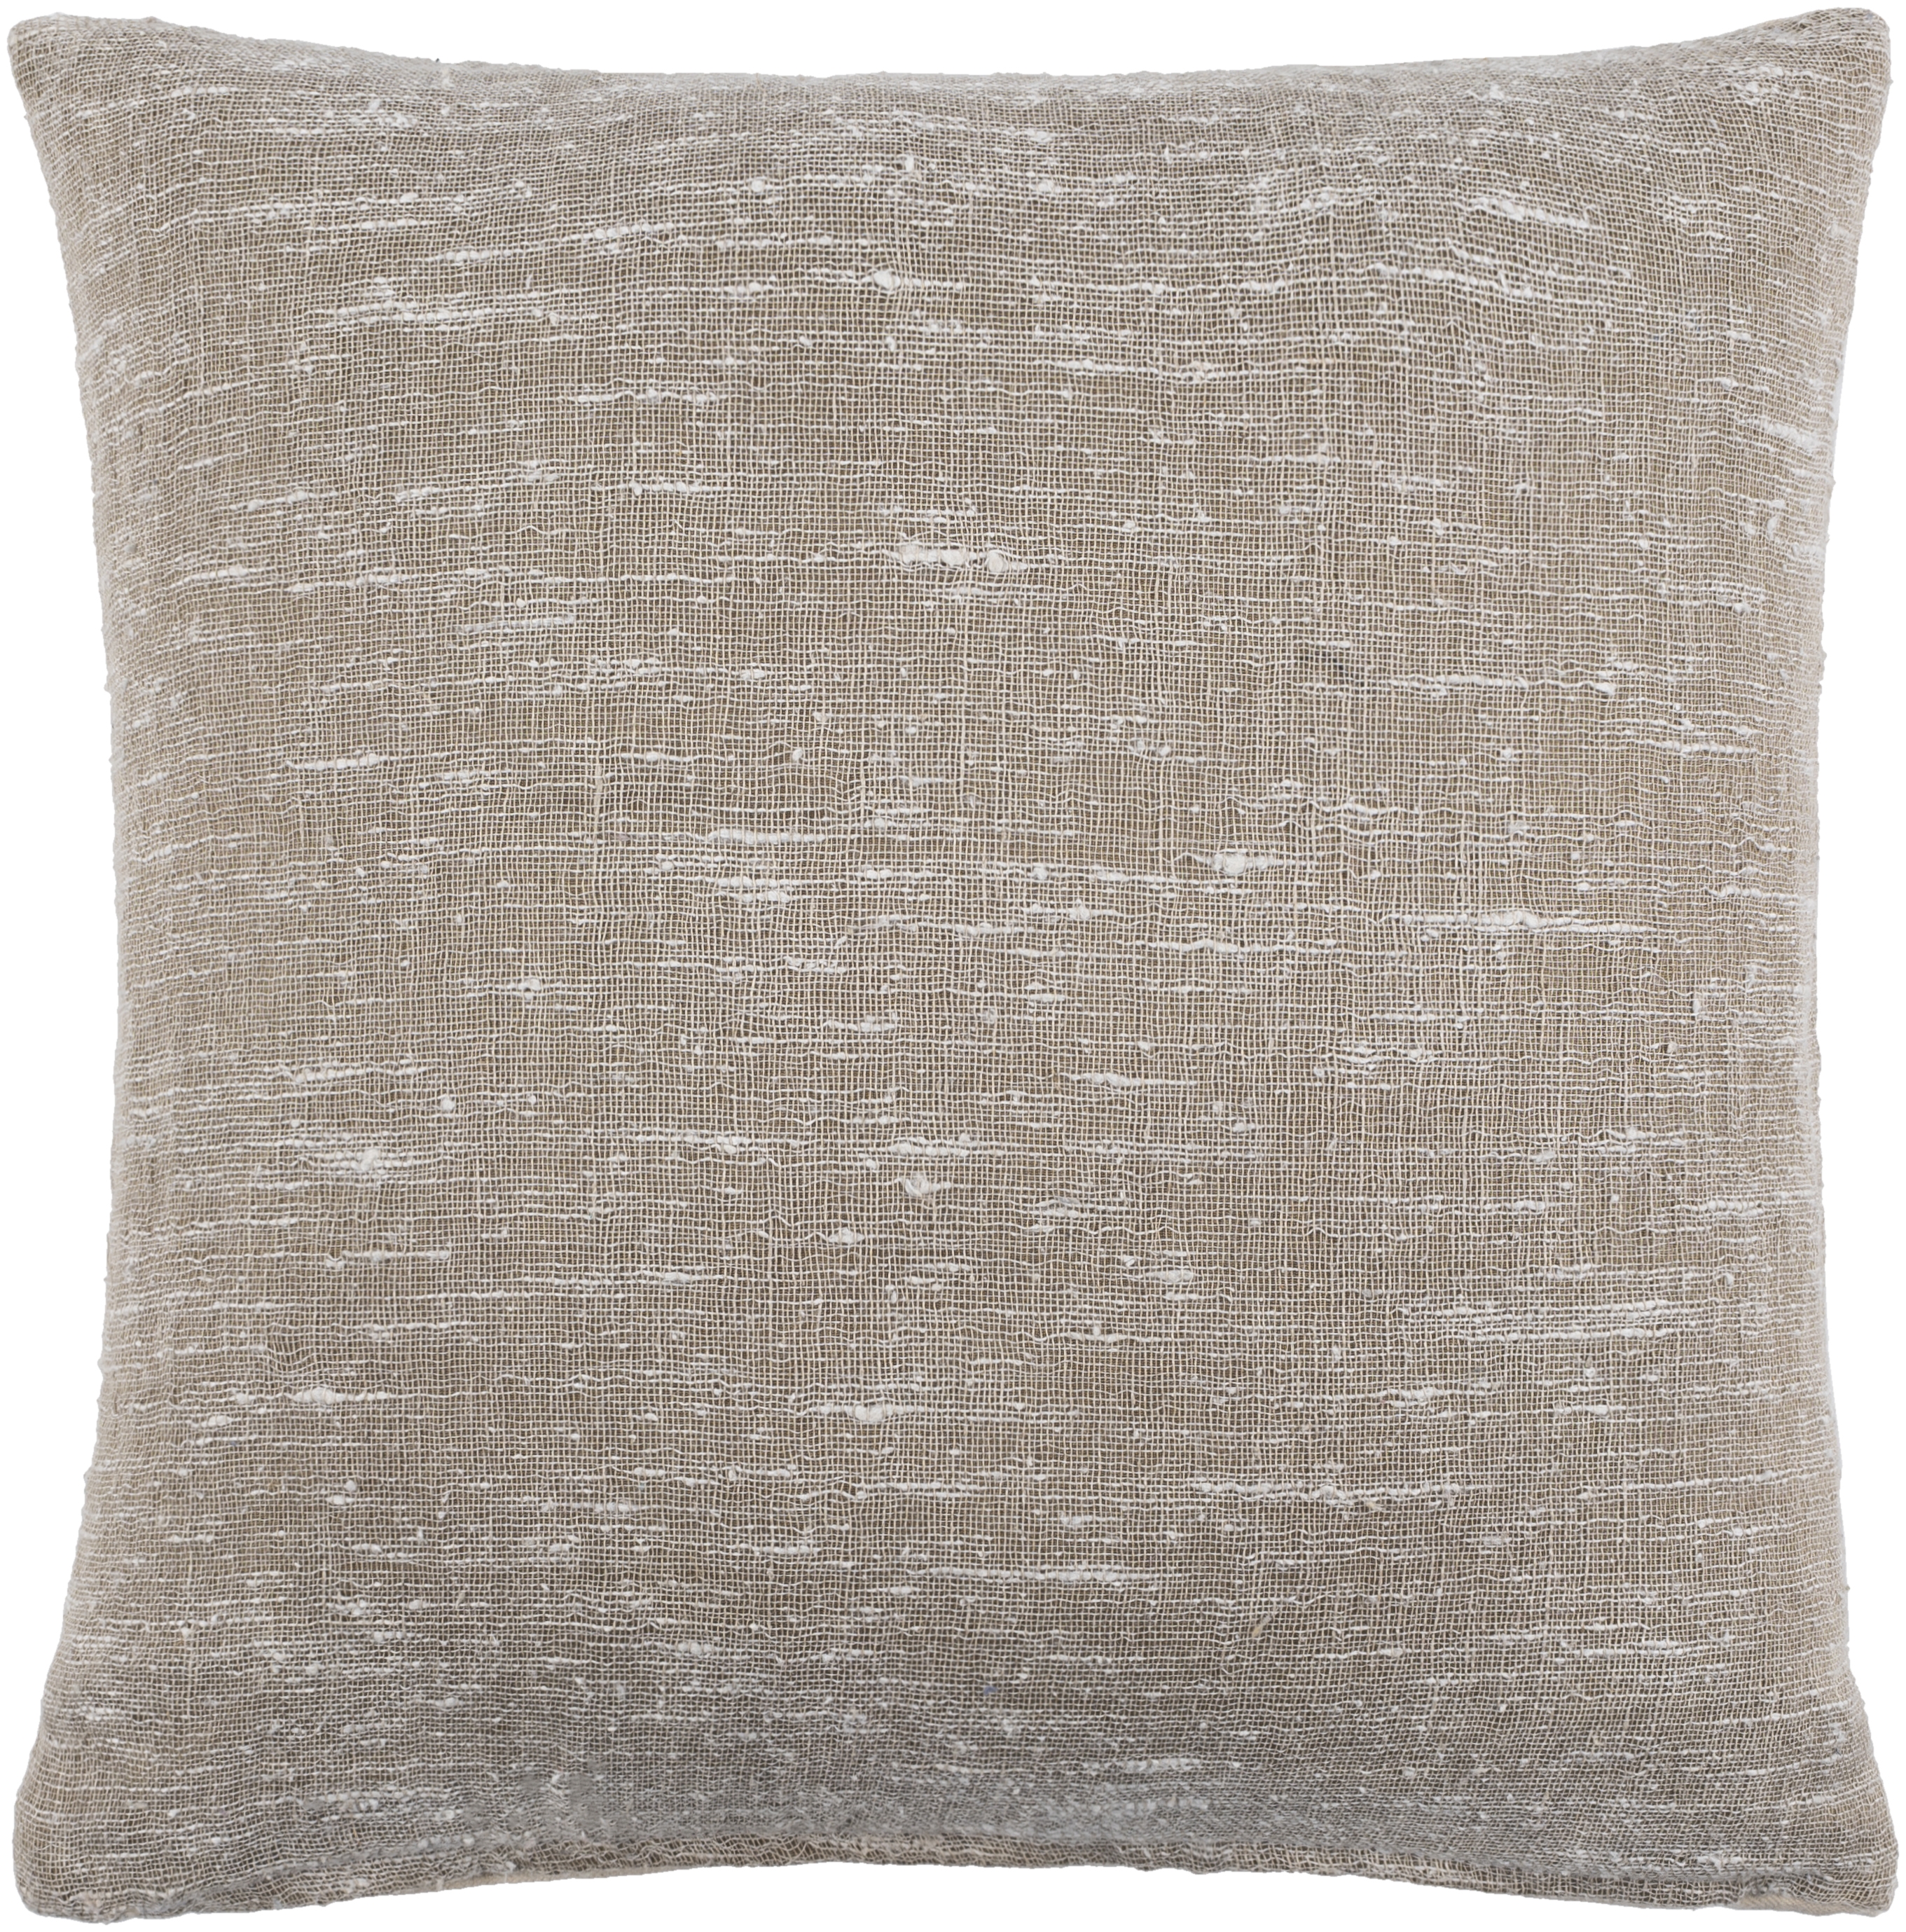 Romona Throw Pillow, 22" x 22", pillow cover only - Image 0